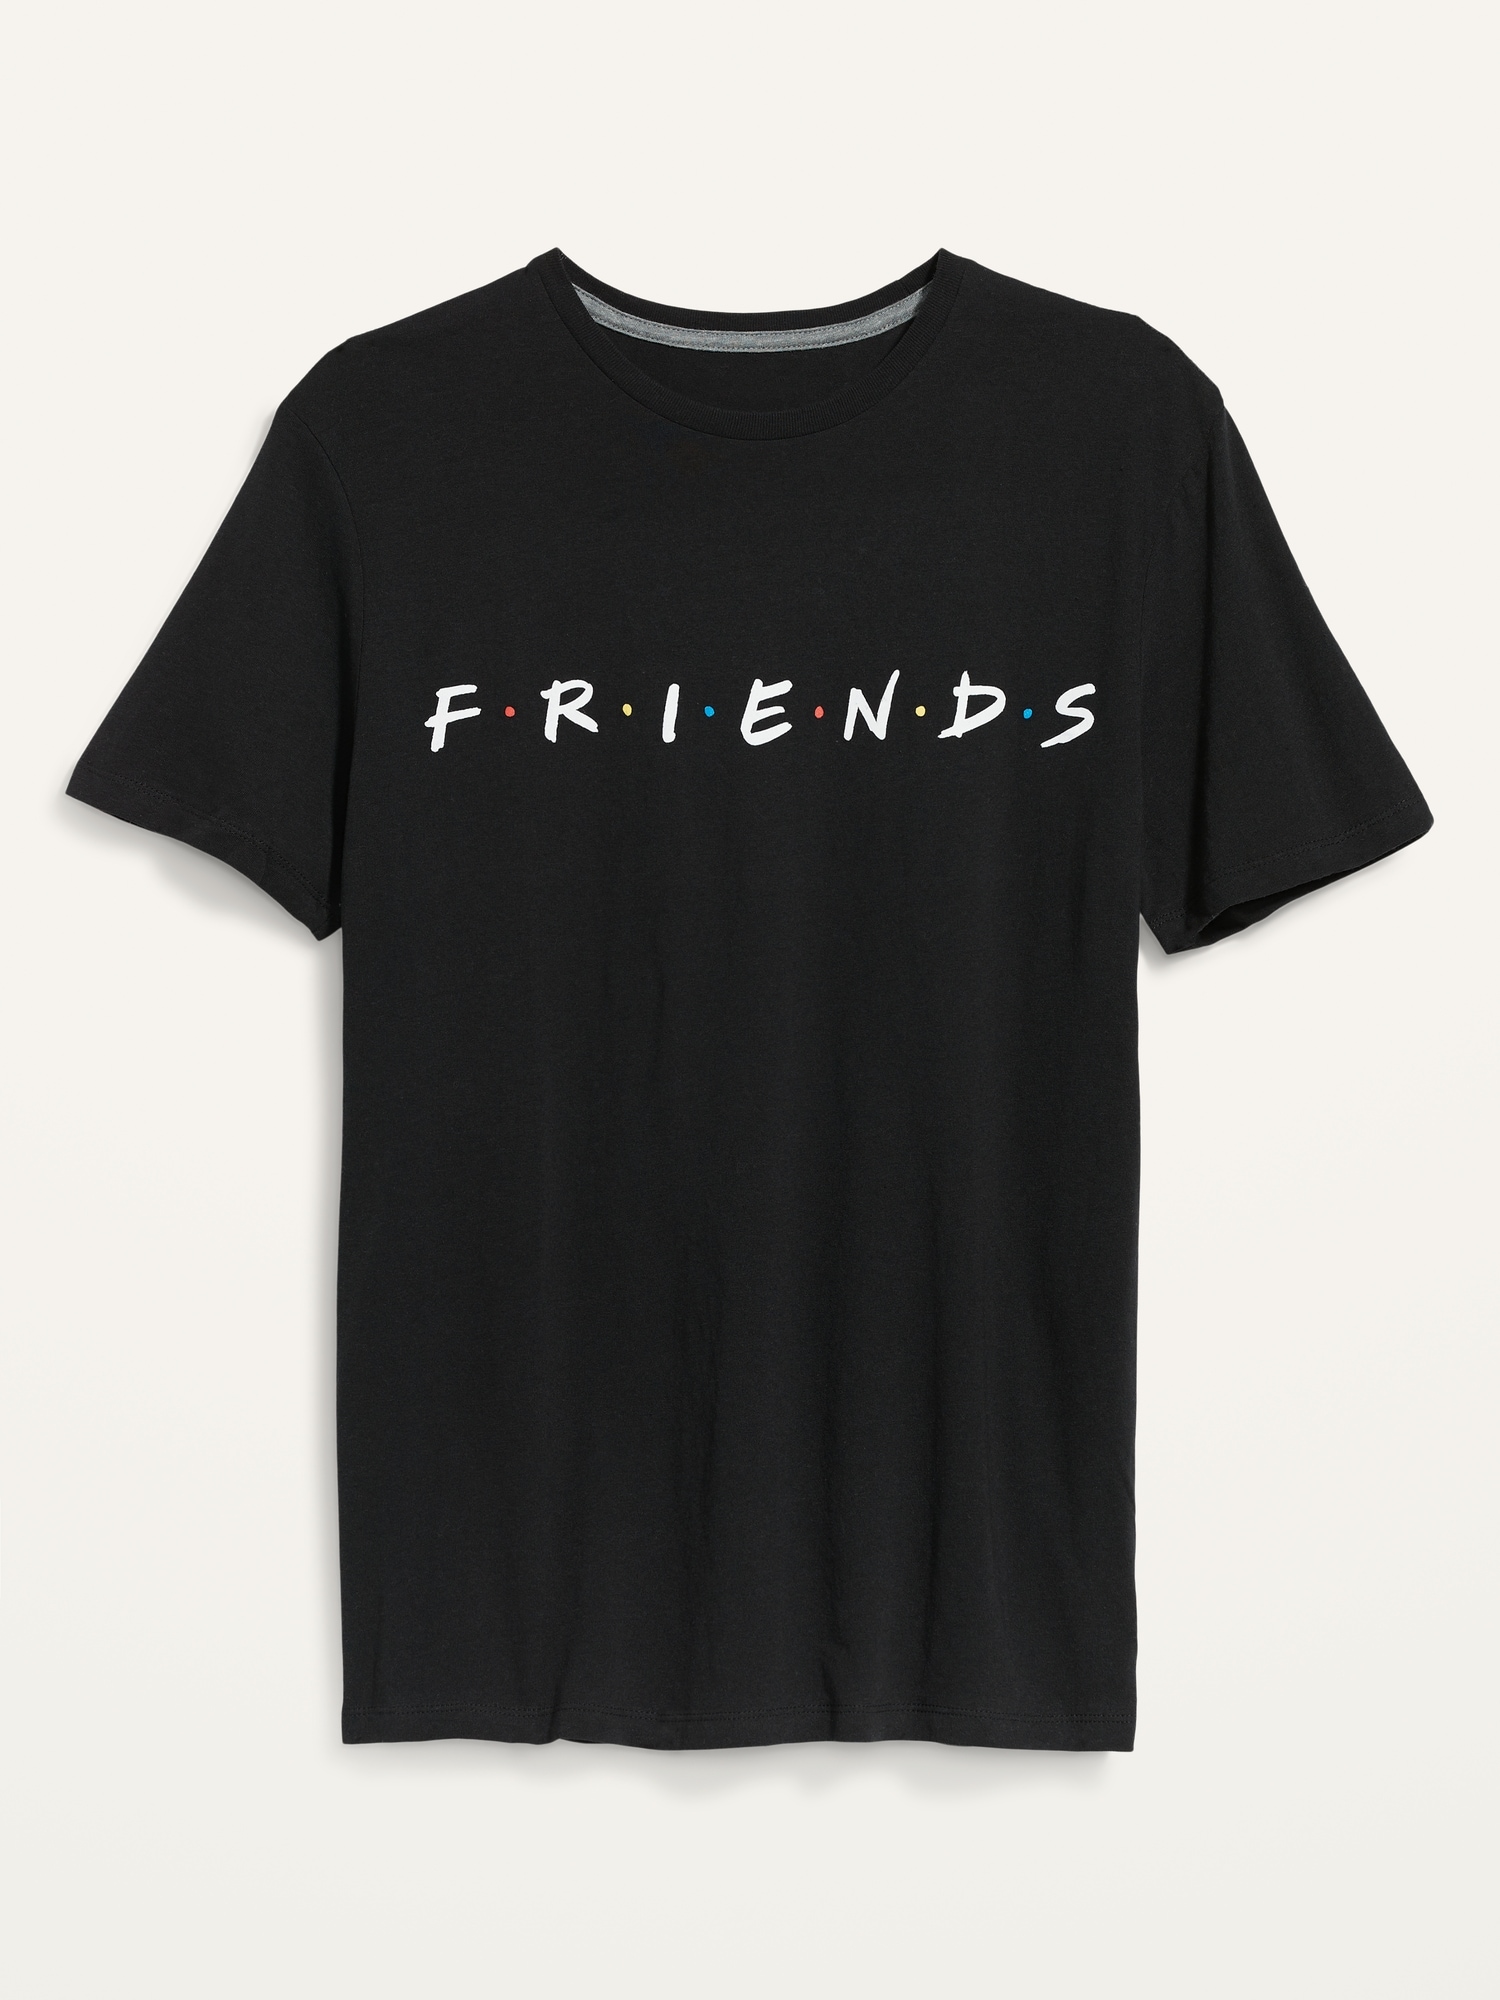 Old Navy Friends&#153 Gender-Neutral T-Shirt for Adults black. 1